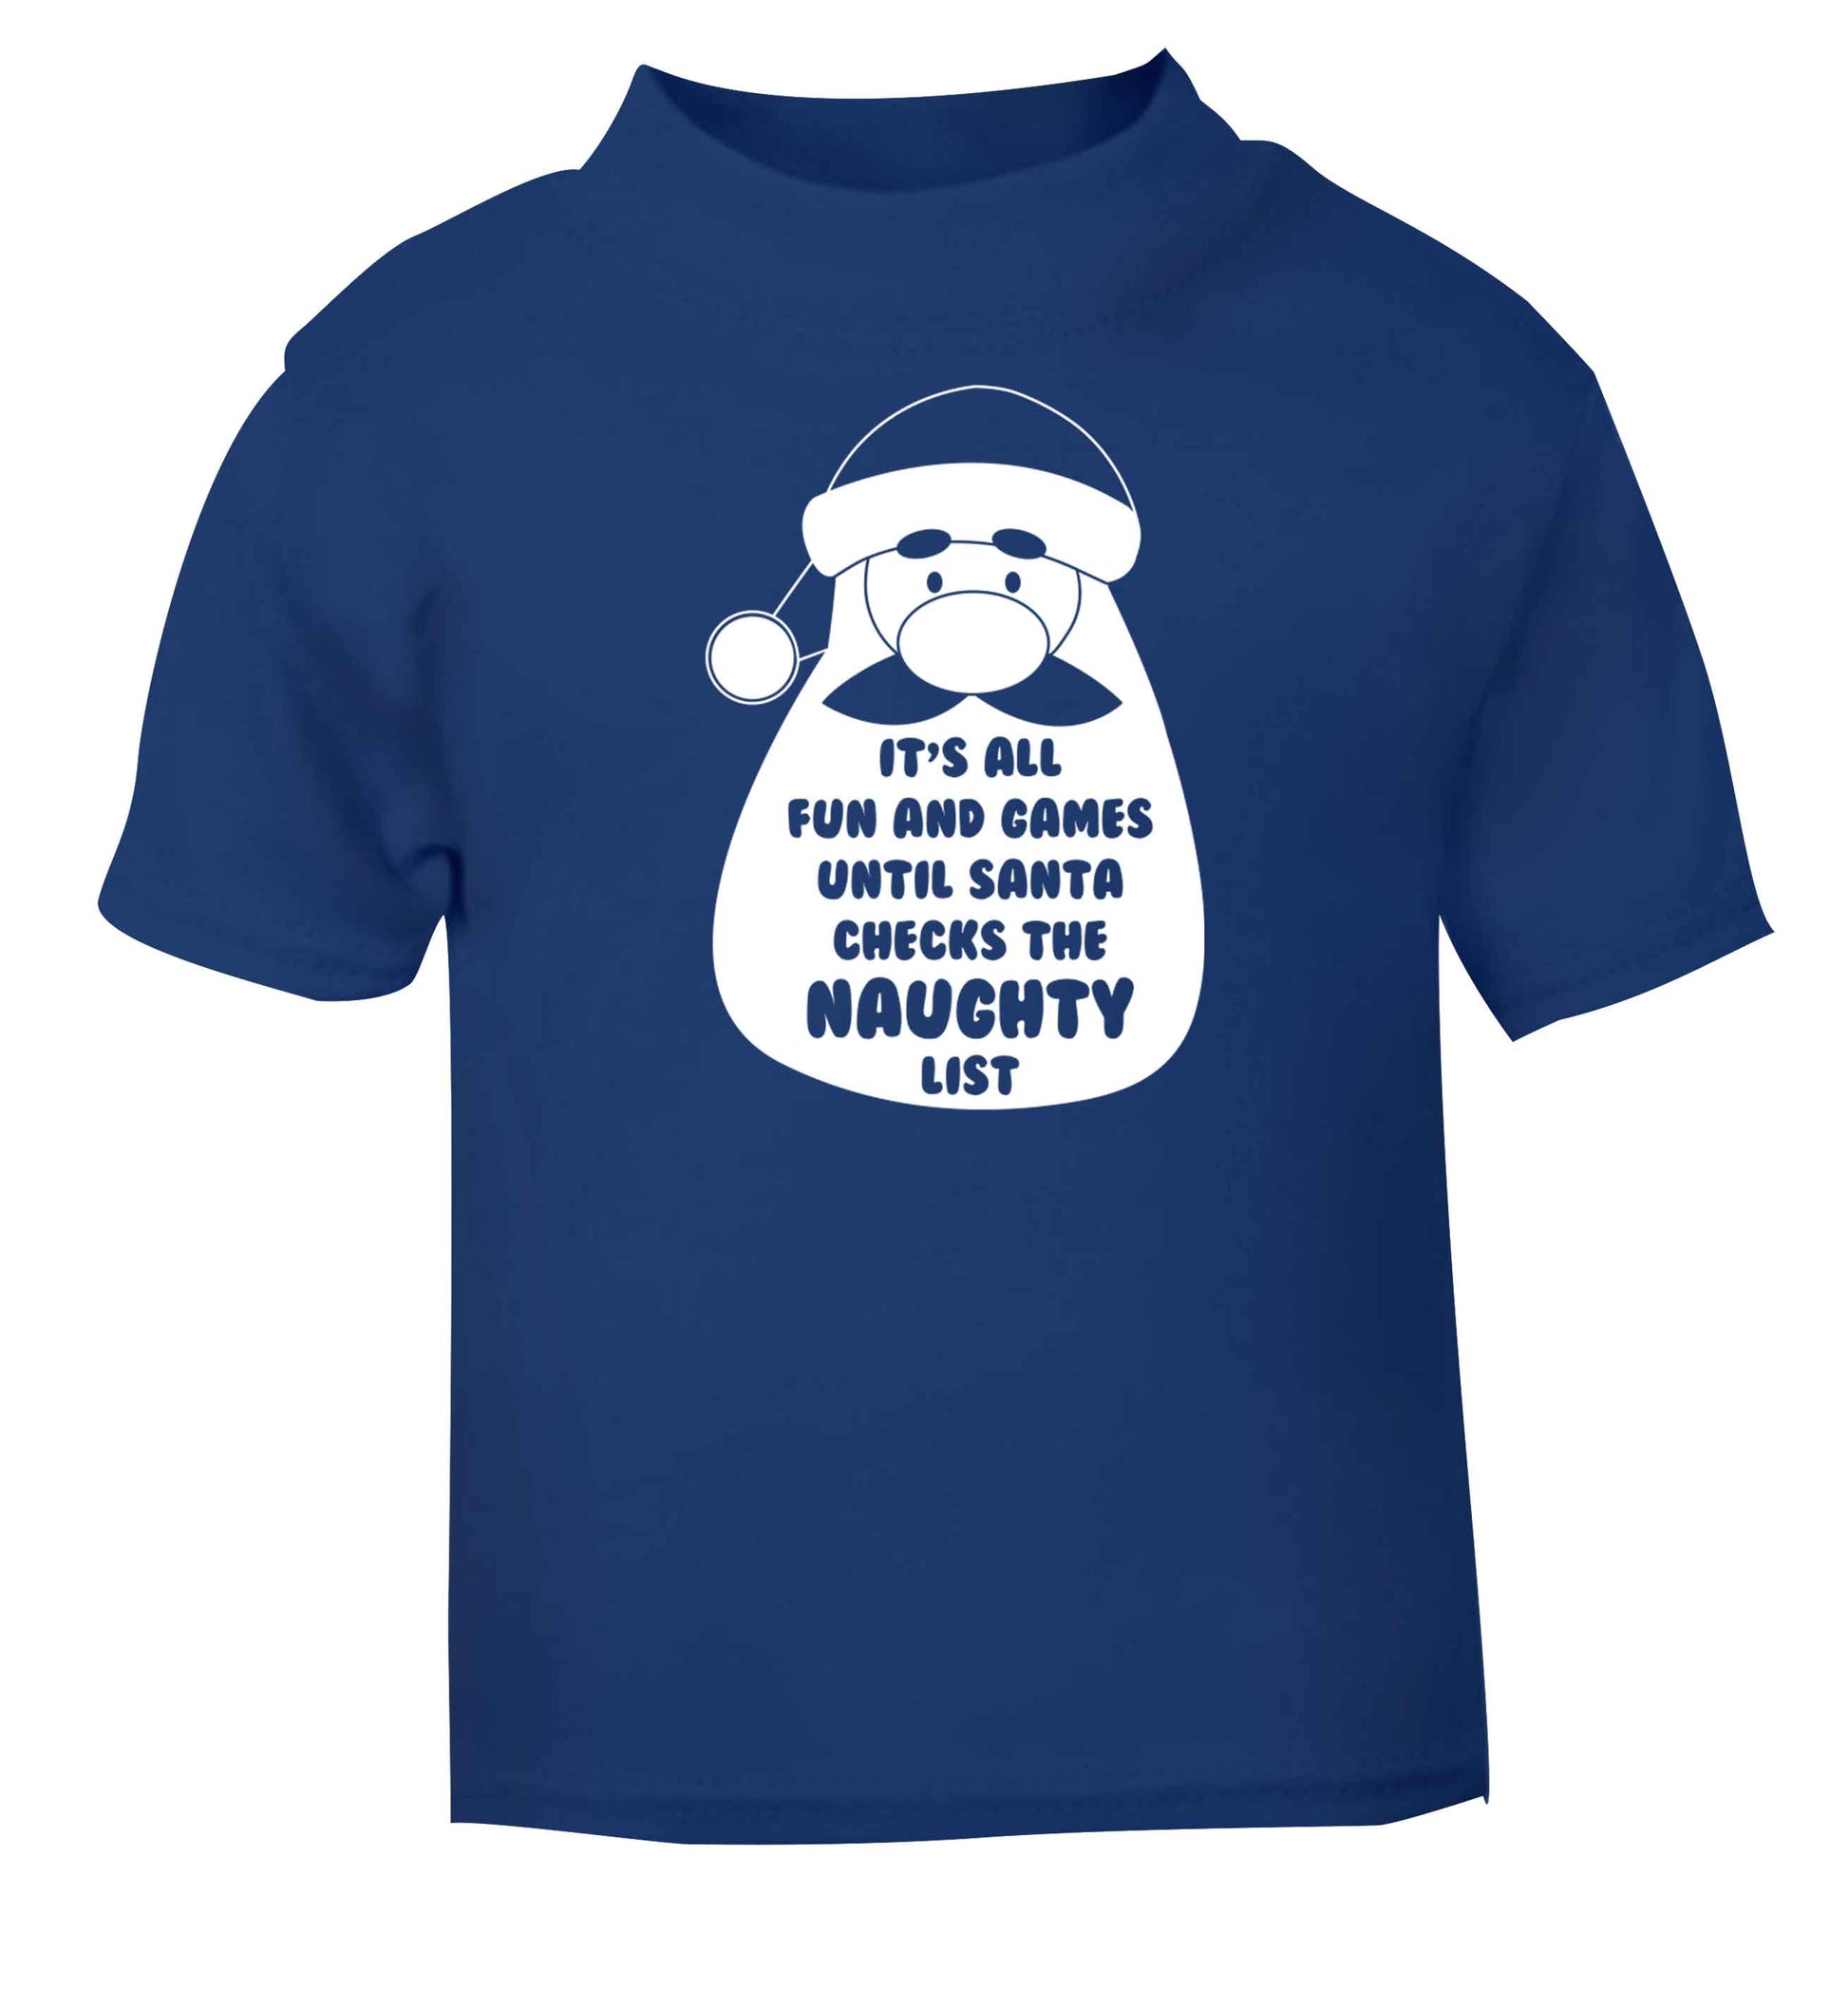 It's all fun and games until Santa checks the naughty list blue baby toddler Tshirt 2 Years